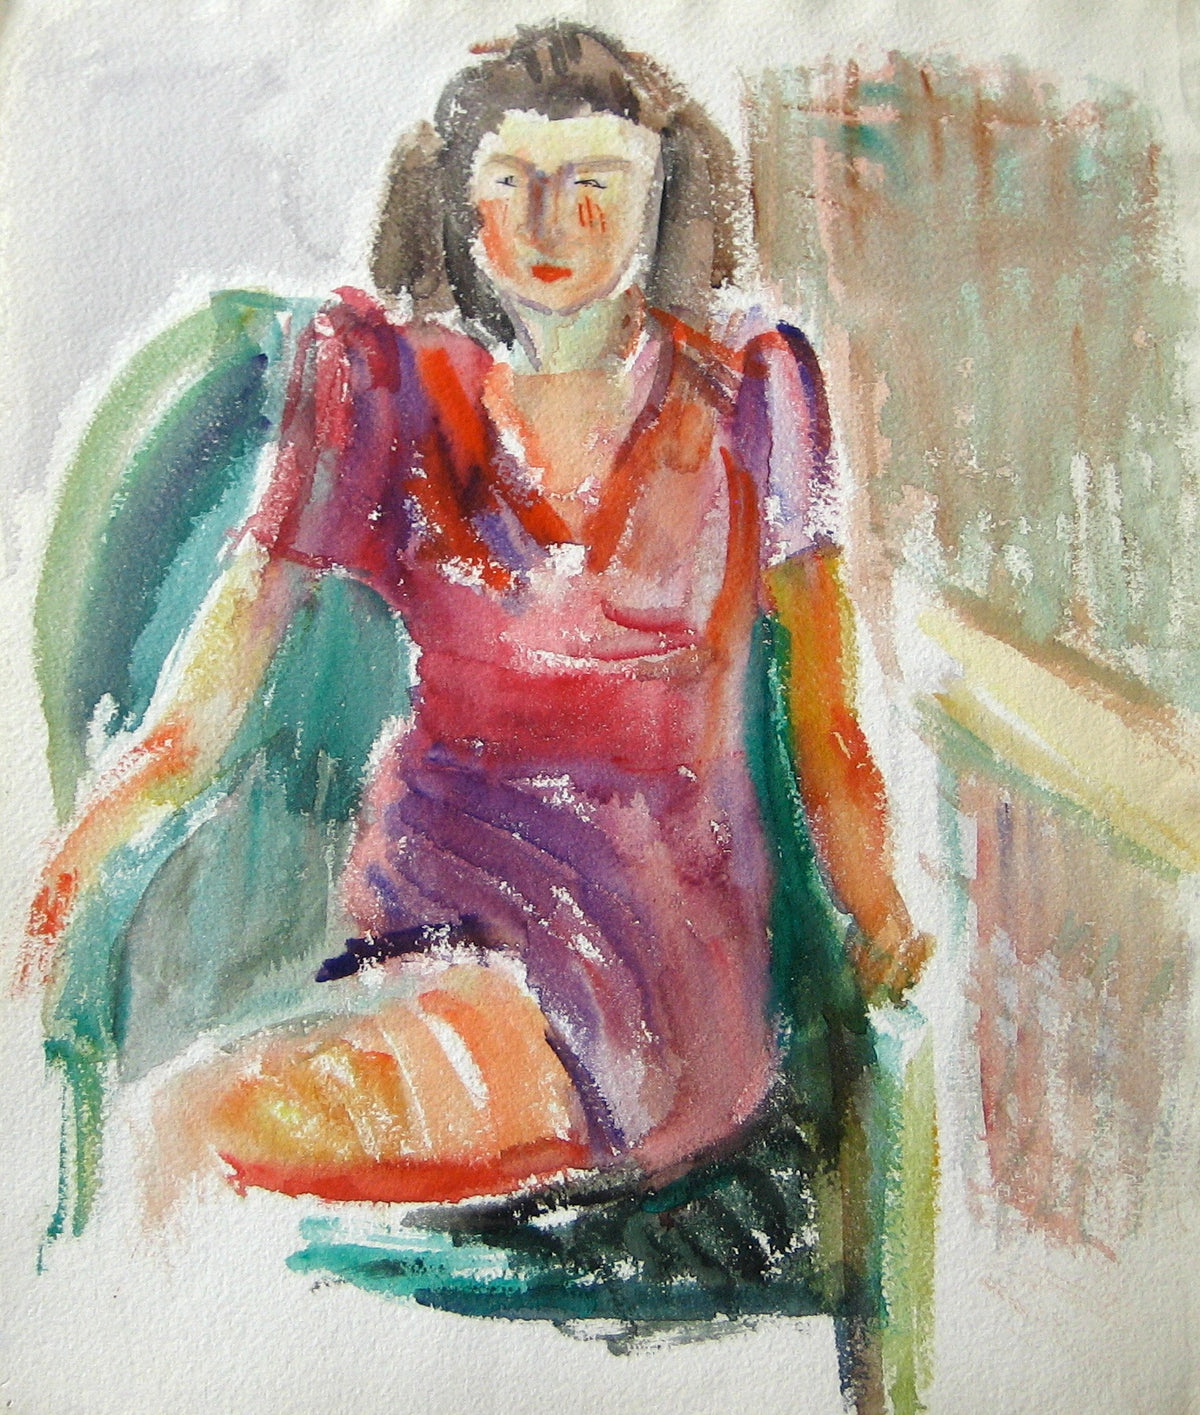 Expressive Seated Woman in Dress &lt;br&gt;Early-Mid 20th Century Watercolor&lt;br&gt;&lt;br&gt;#13219